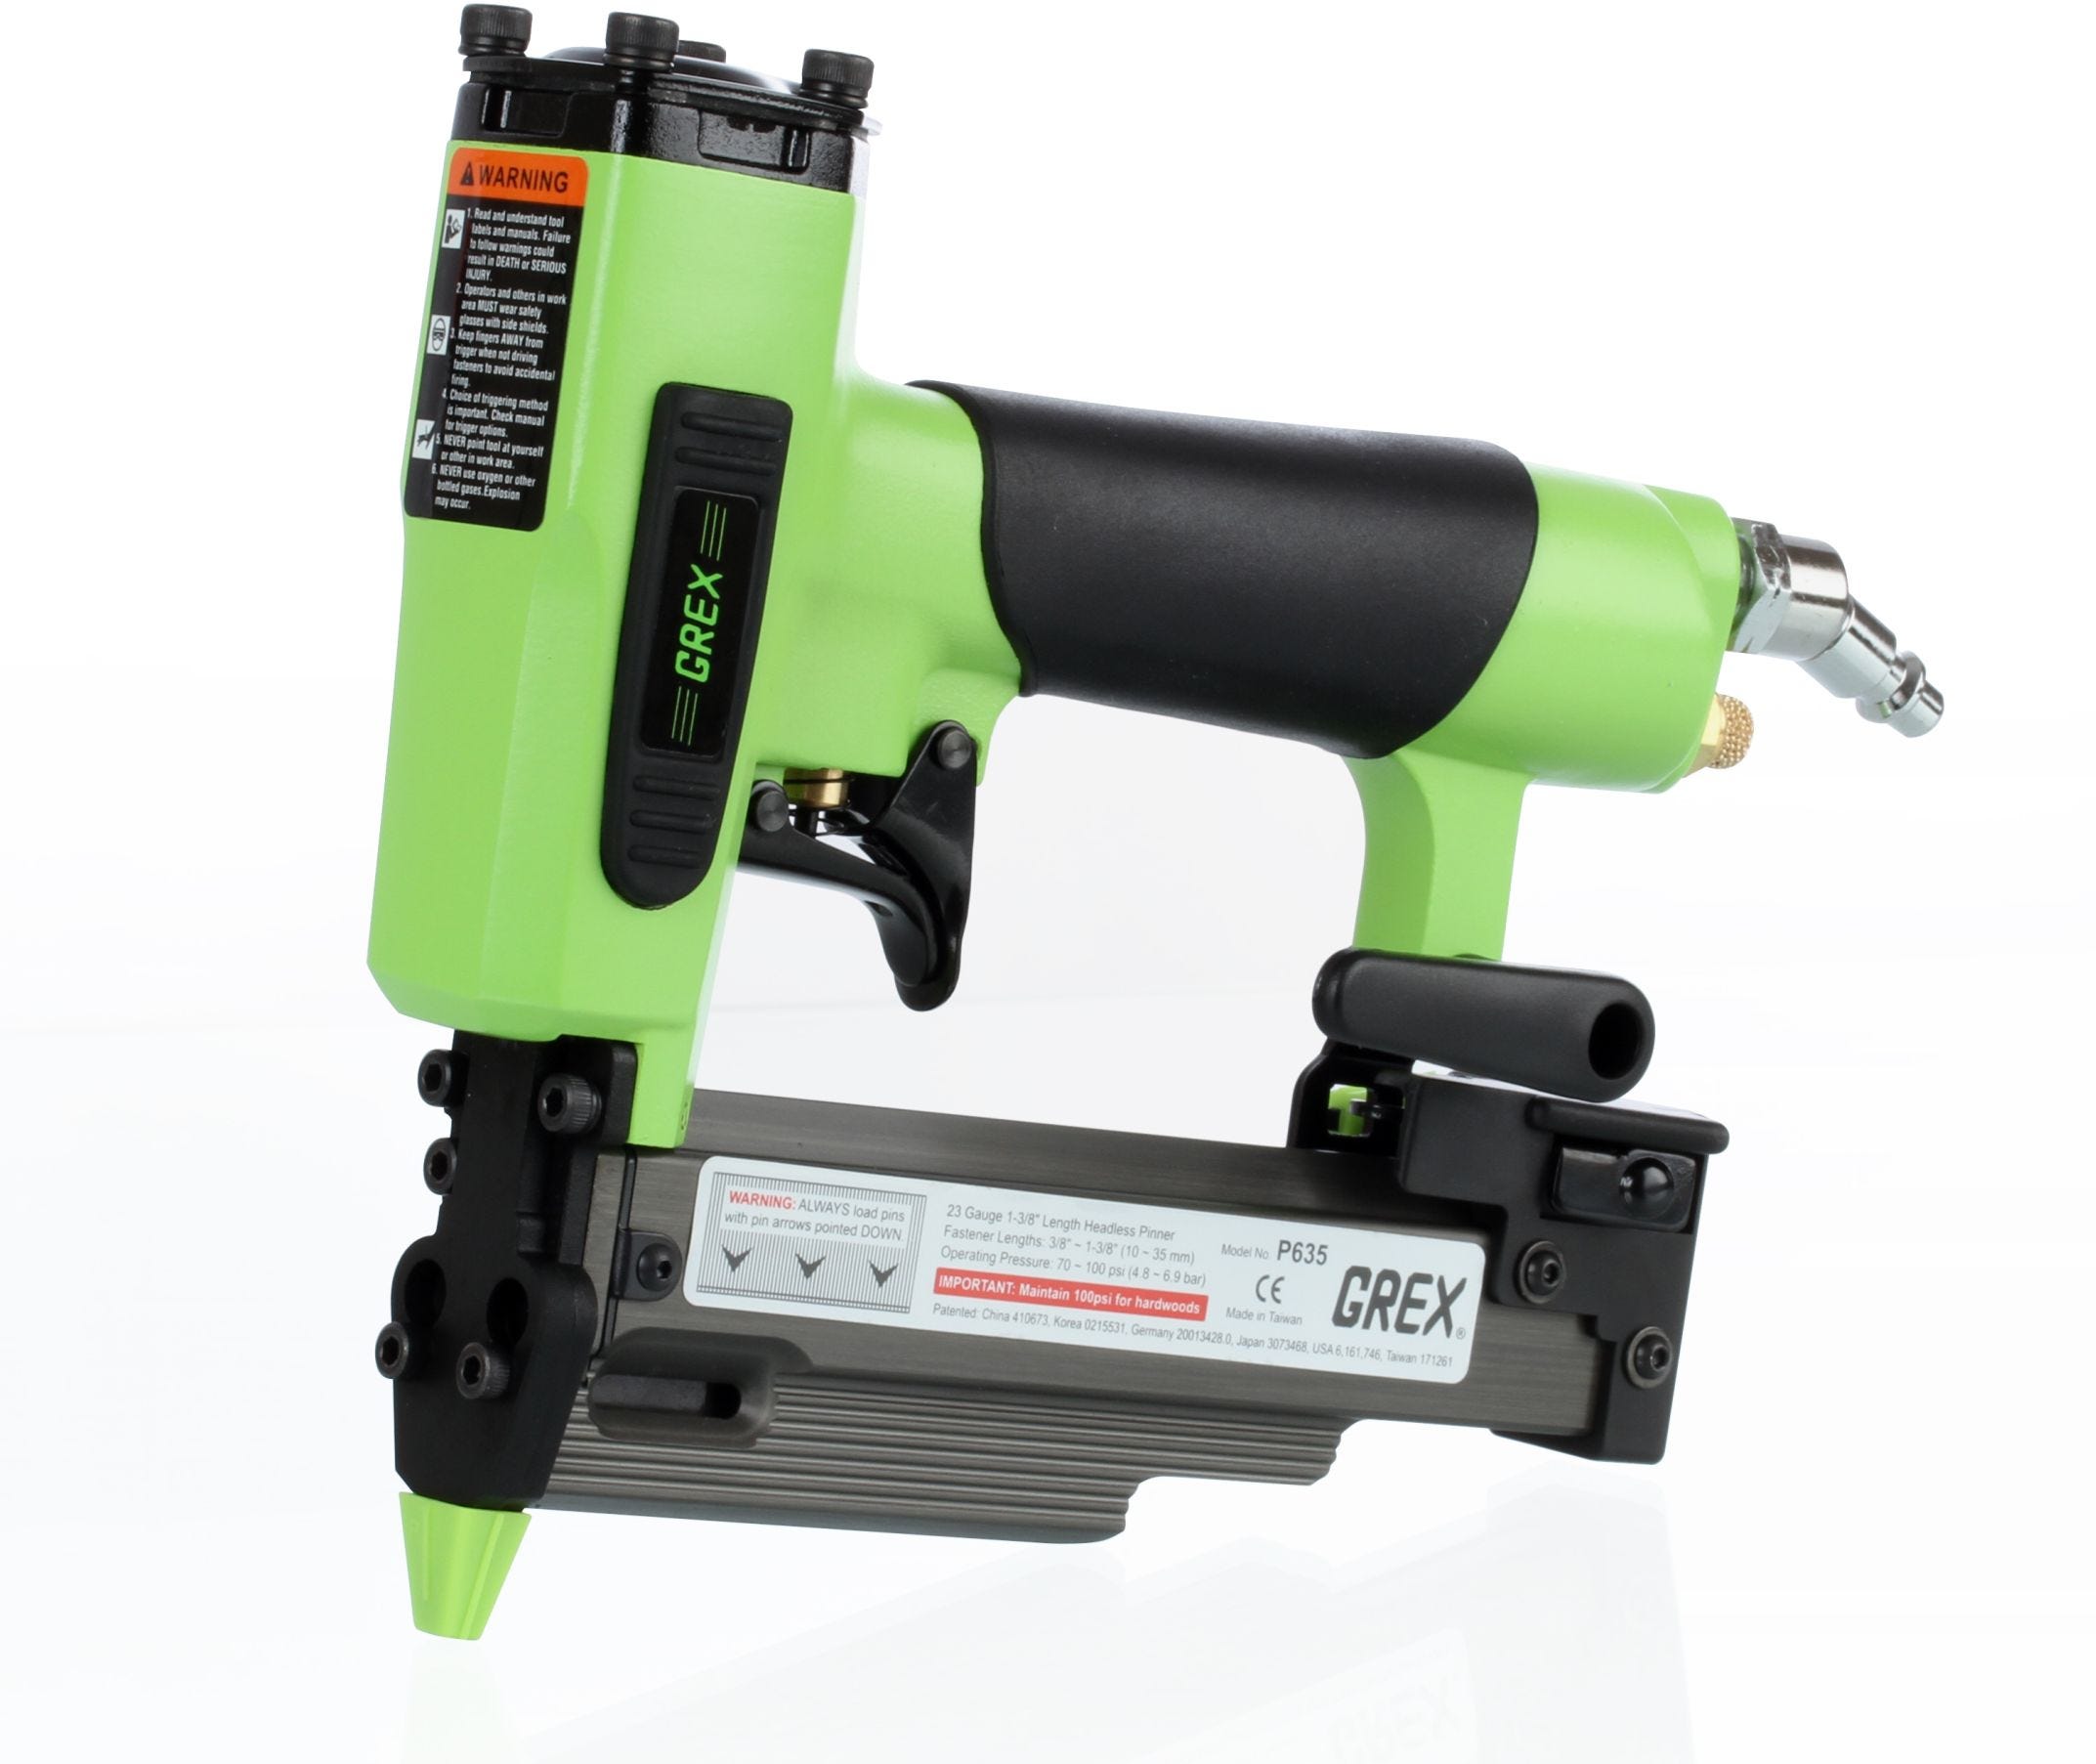 Metabo NP35A 1 3/8 inch 23-Gauge Pin Nailer for sale online 